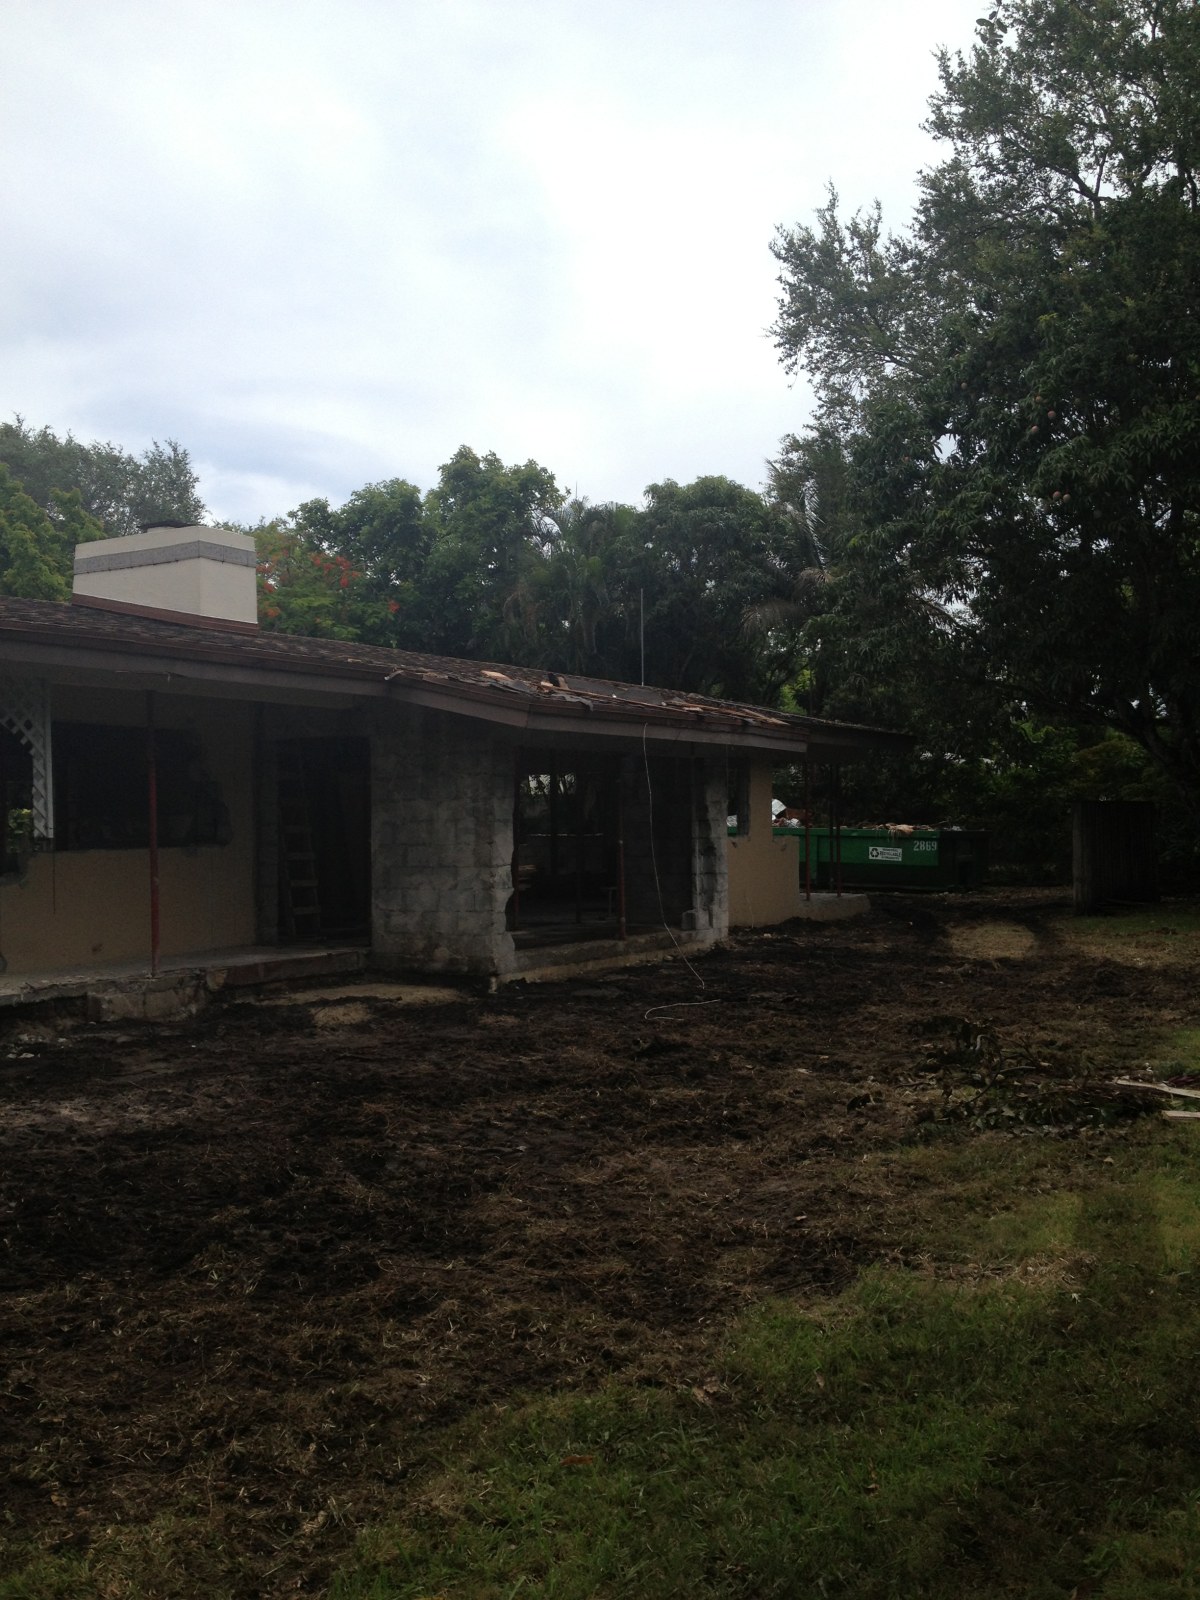 Pinecrest Remodel structural demo and prep